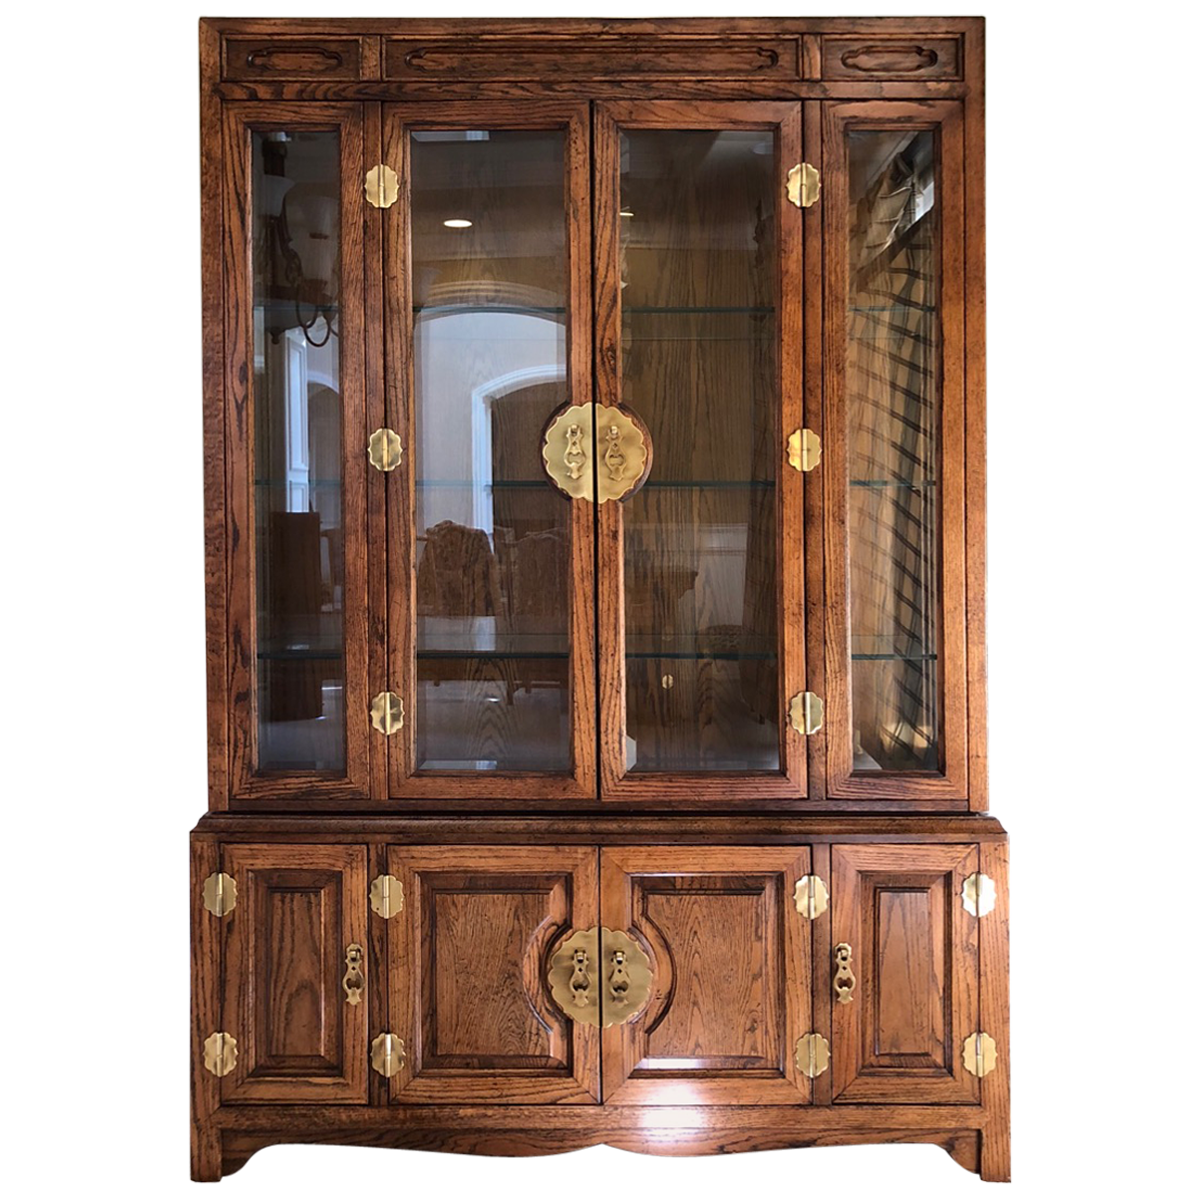 China Cabinet Image PNG Image High Quality PNG Image